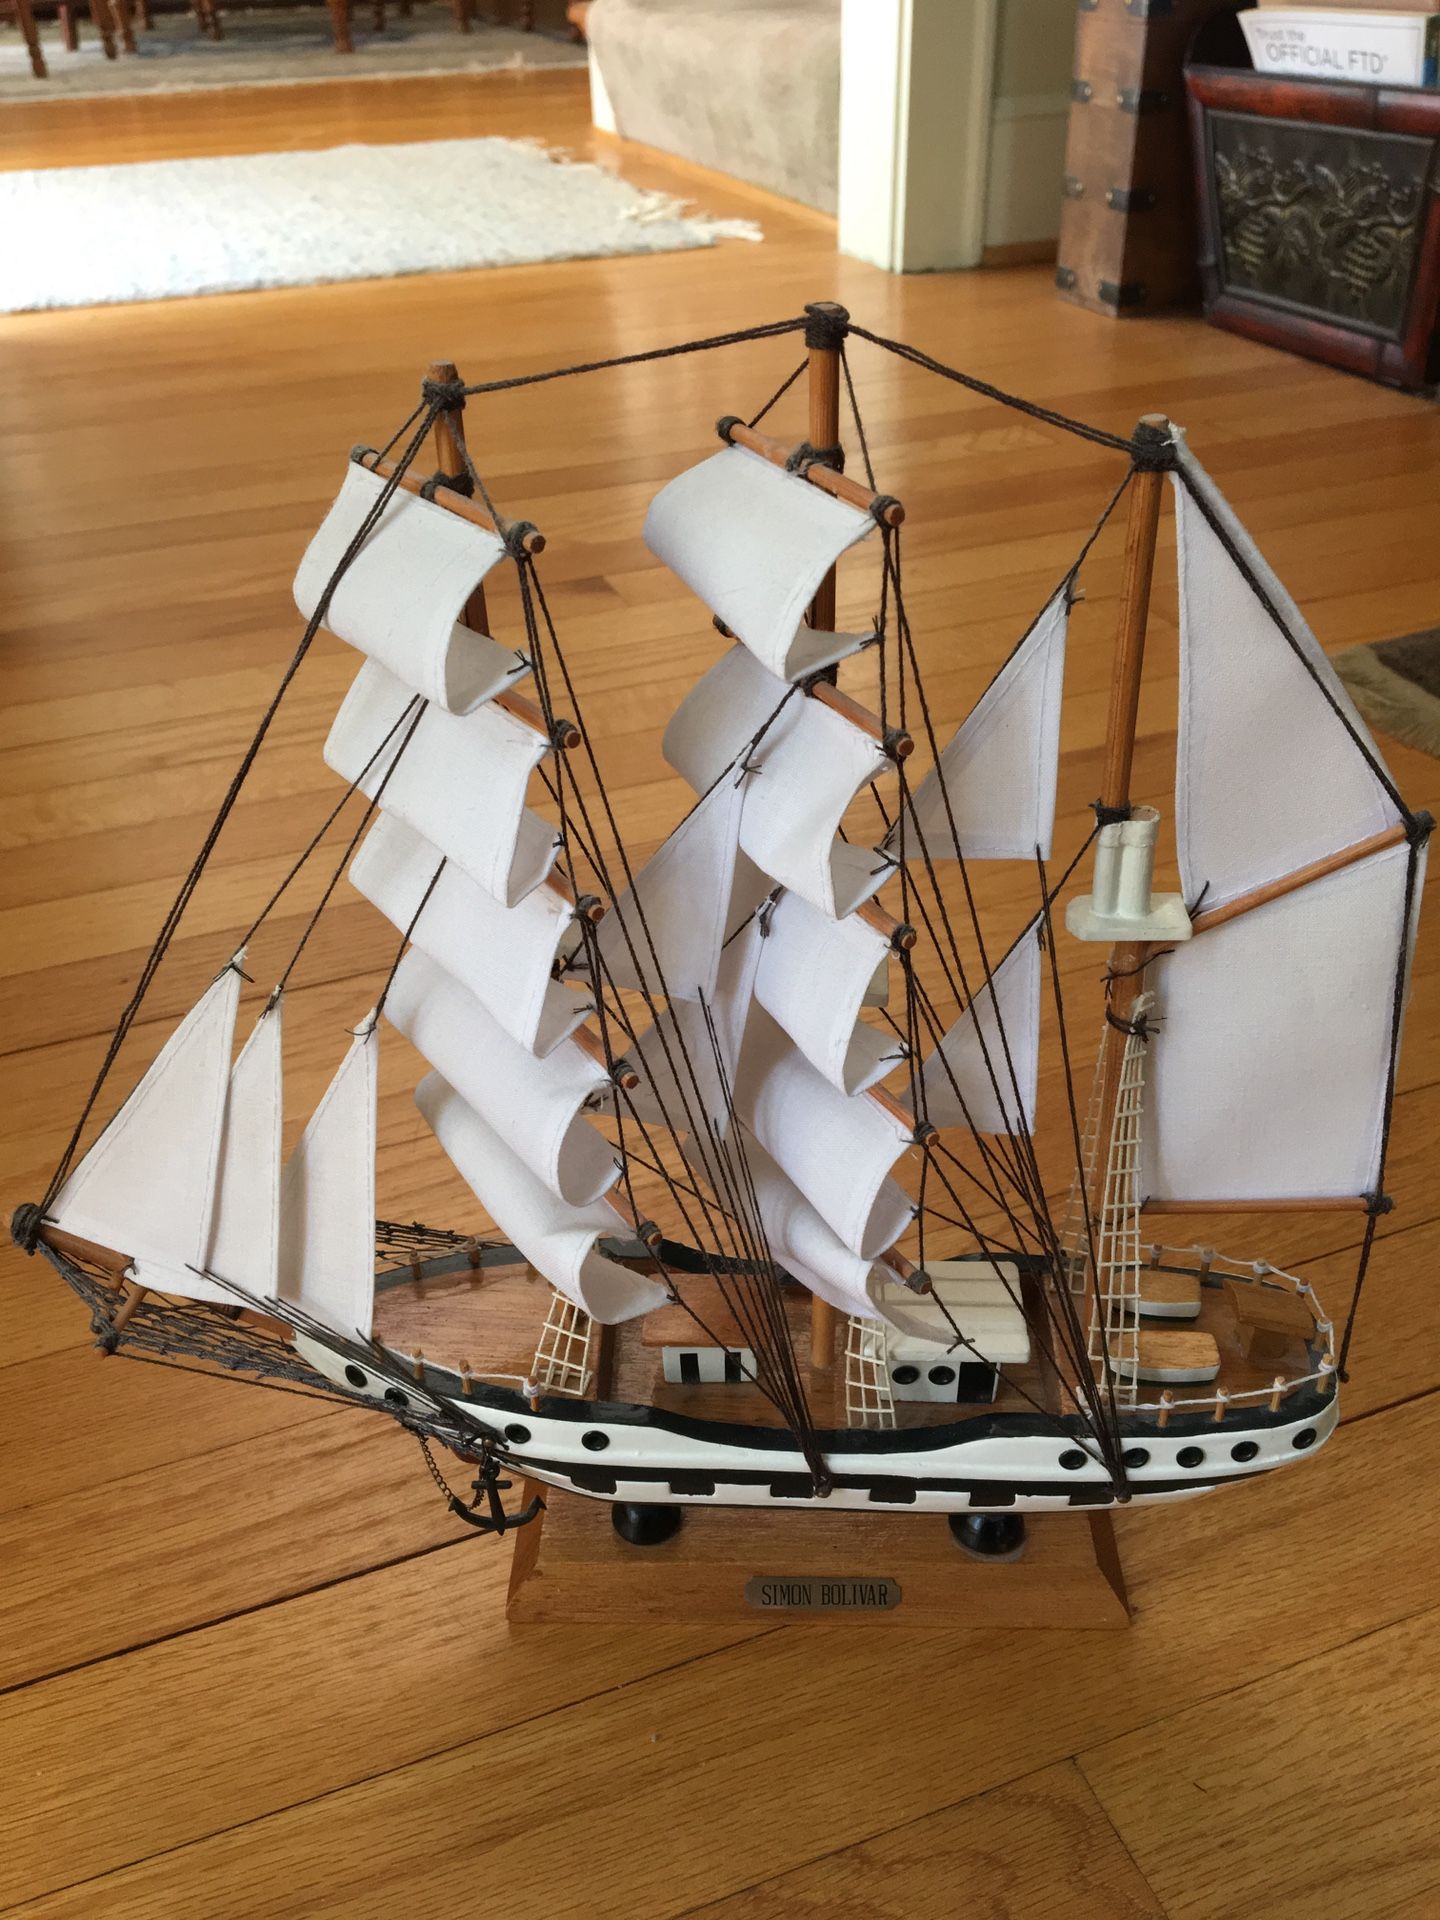 Simon Bolivar model wooden ship replica with cloth sails on stand.